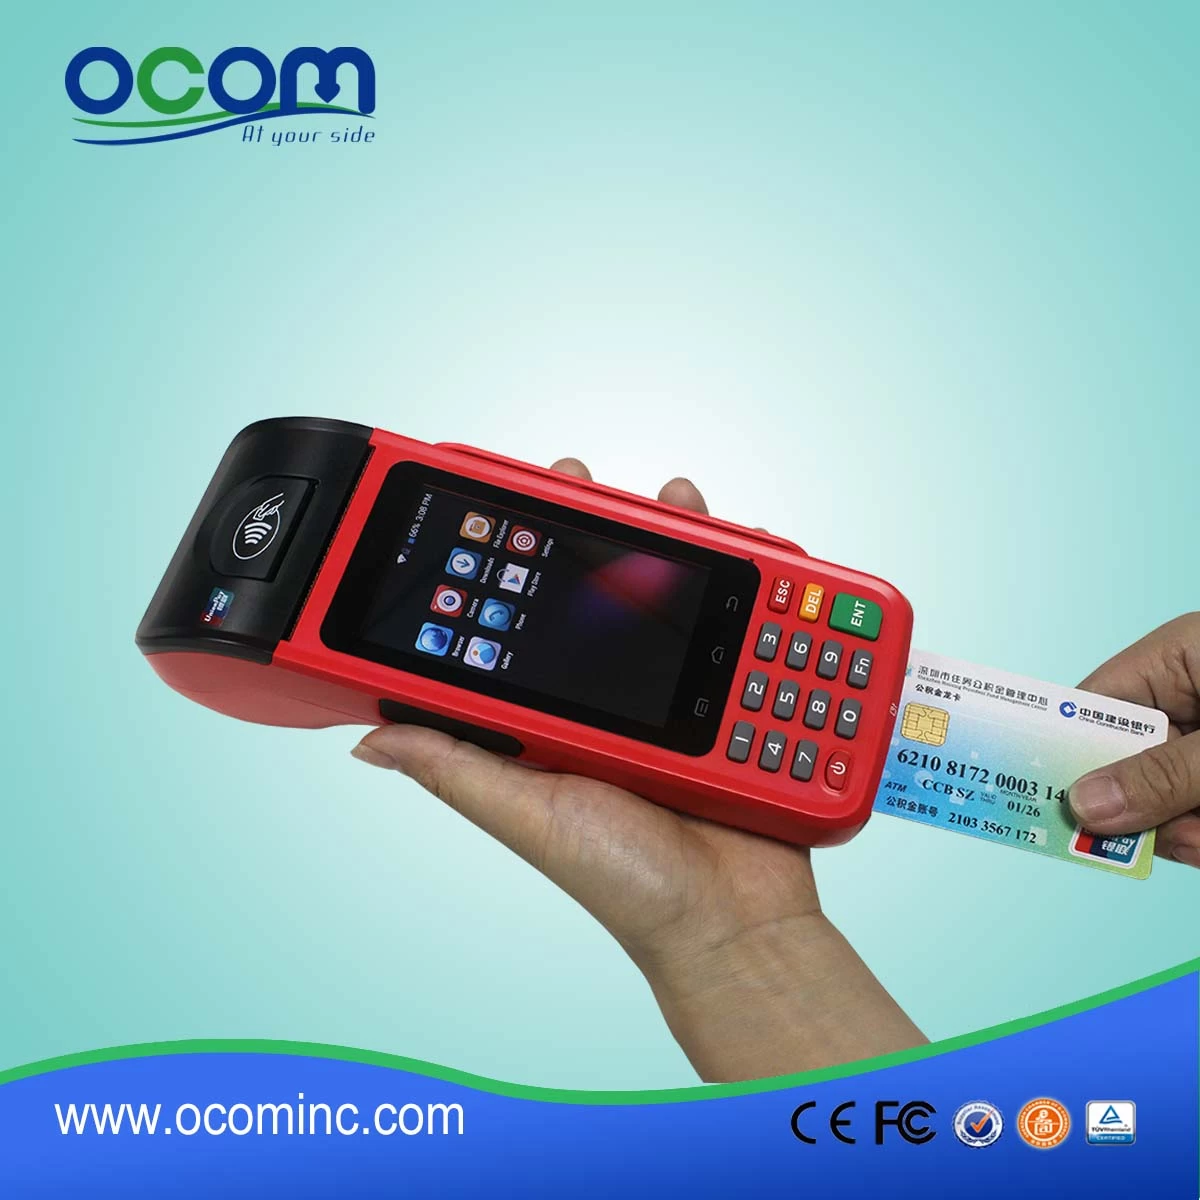 P8000) 2016 Date low cost pos terminal pocket